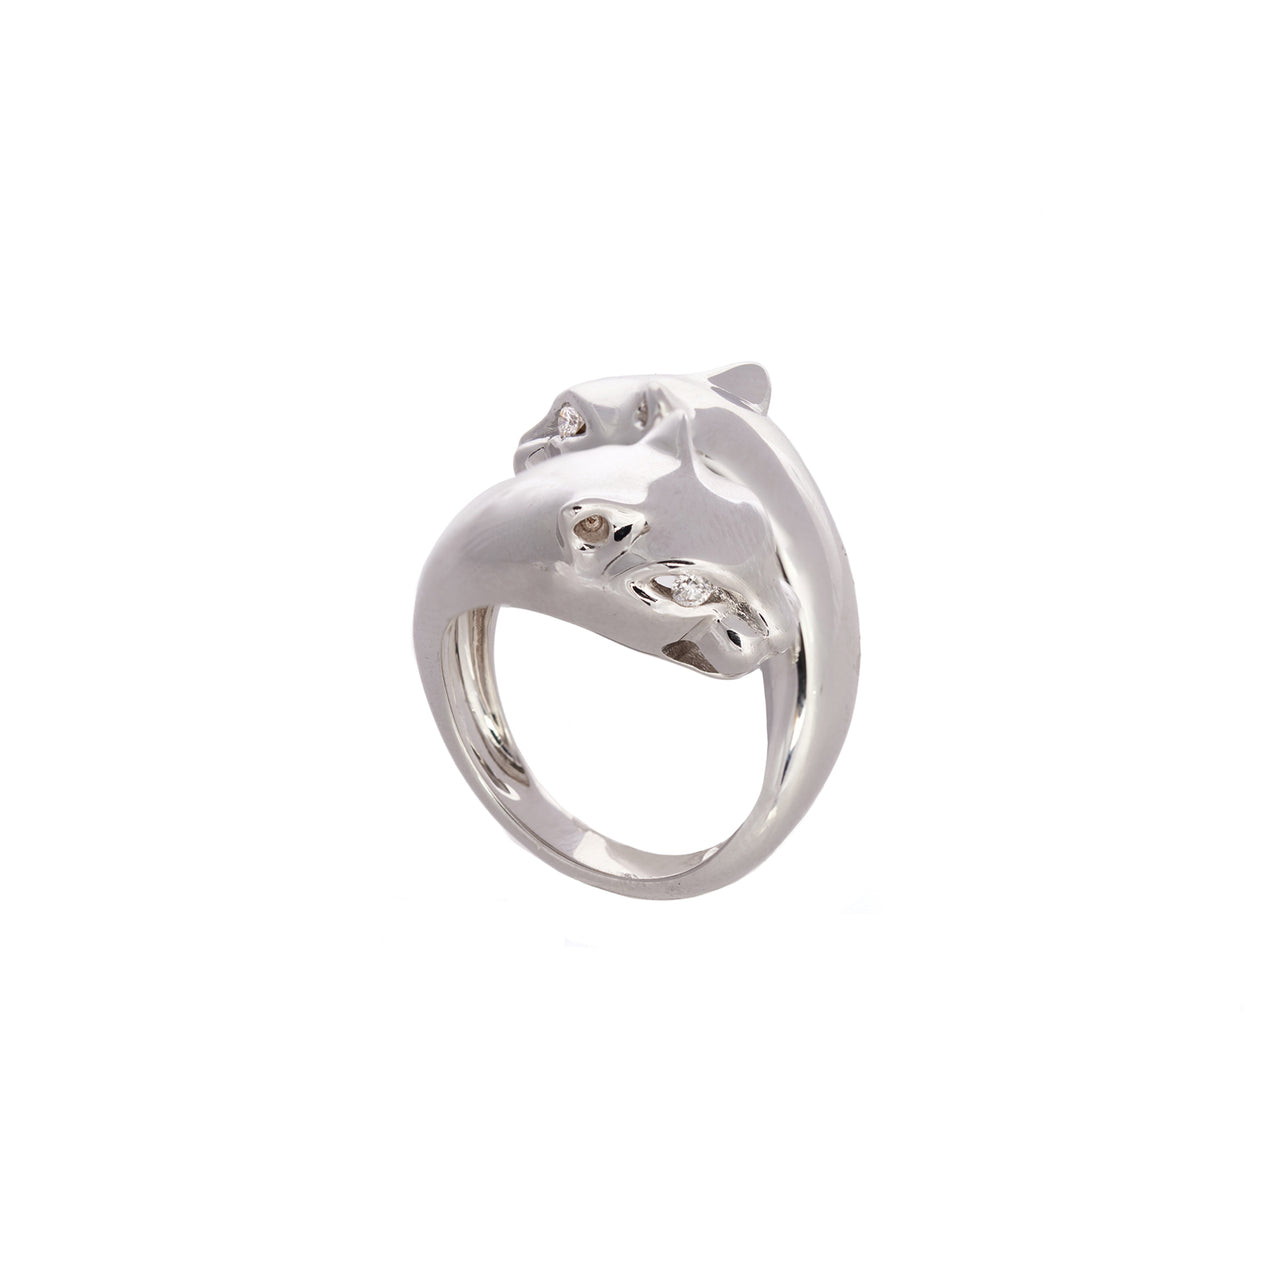 Petite Passionate Panther Ring